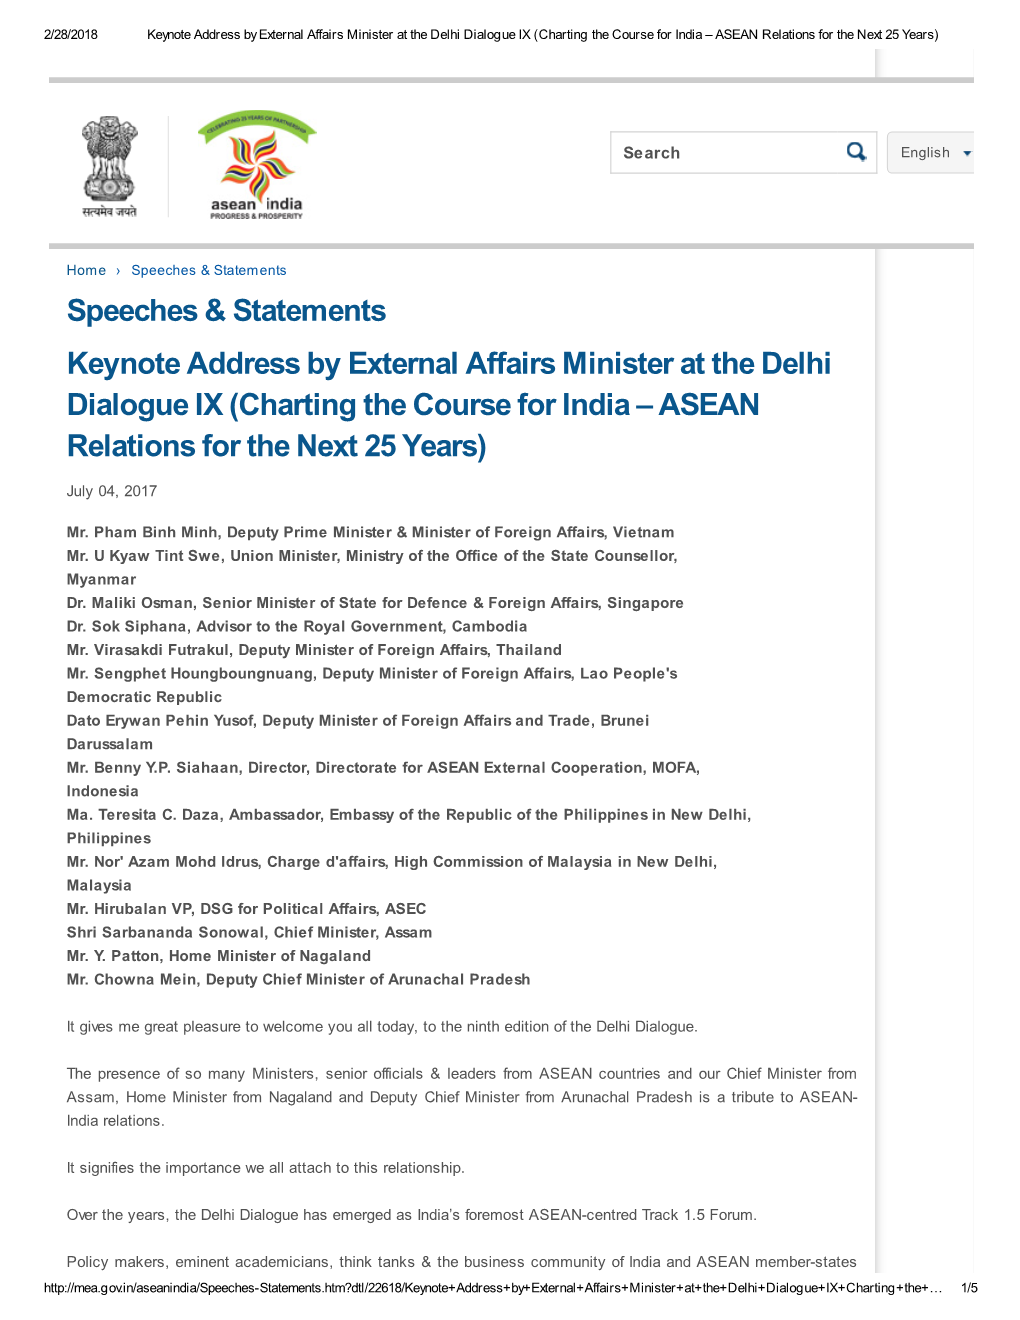 Keynote Address by External Affairs Minister at the Delhi Dialogue IX (Charting the Course for India – ASEAN Relations for the Next 25 Years)